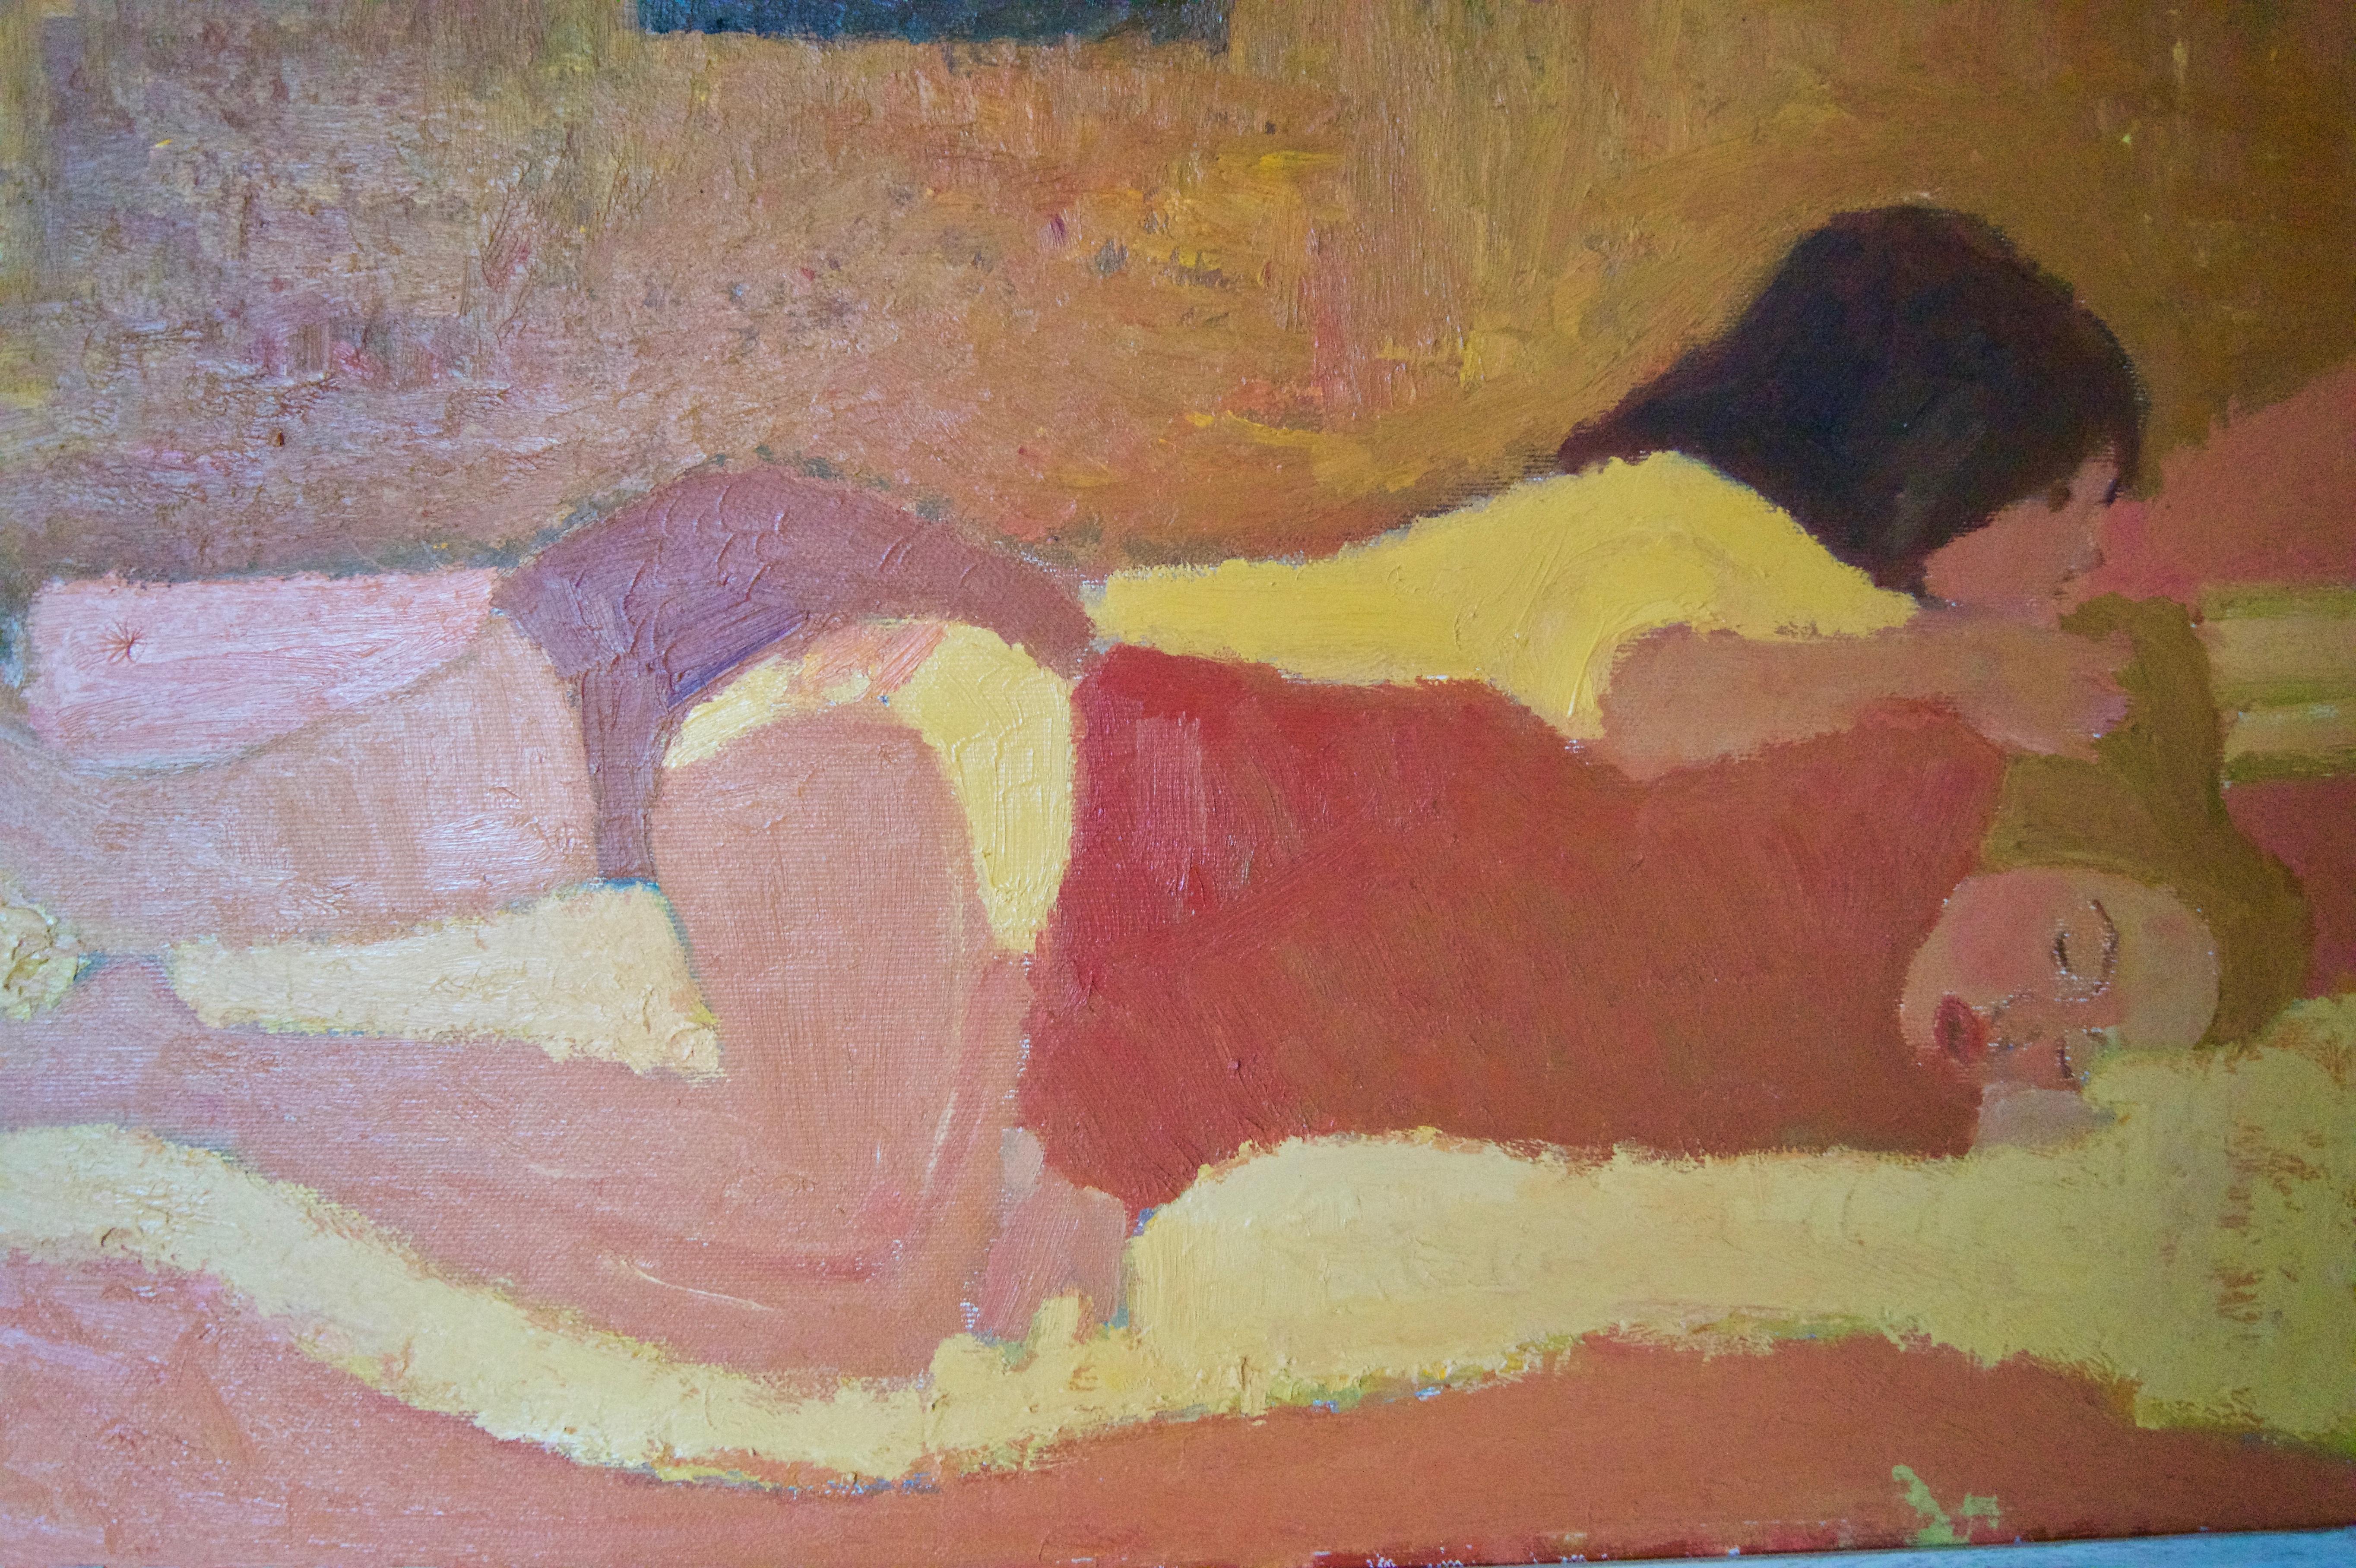 Alan Lambirth b 1959

RA Schools graduate
RA Schools student from 1980 to 1983

Piece is in a light wooden frame.

Keywords: young, woman, women, lesbian, gay, lovers, bed, bedroom, lazy day, orange, yellow, couple, late 20th century.